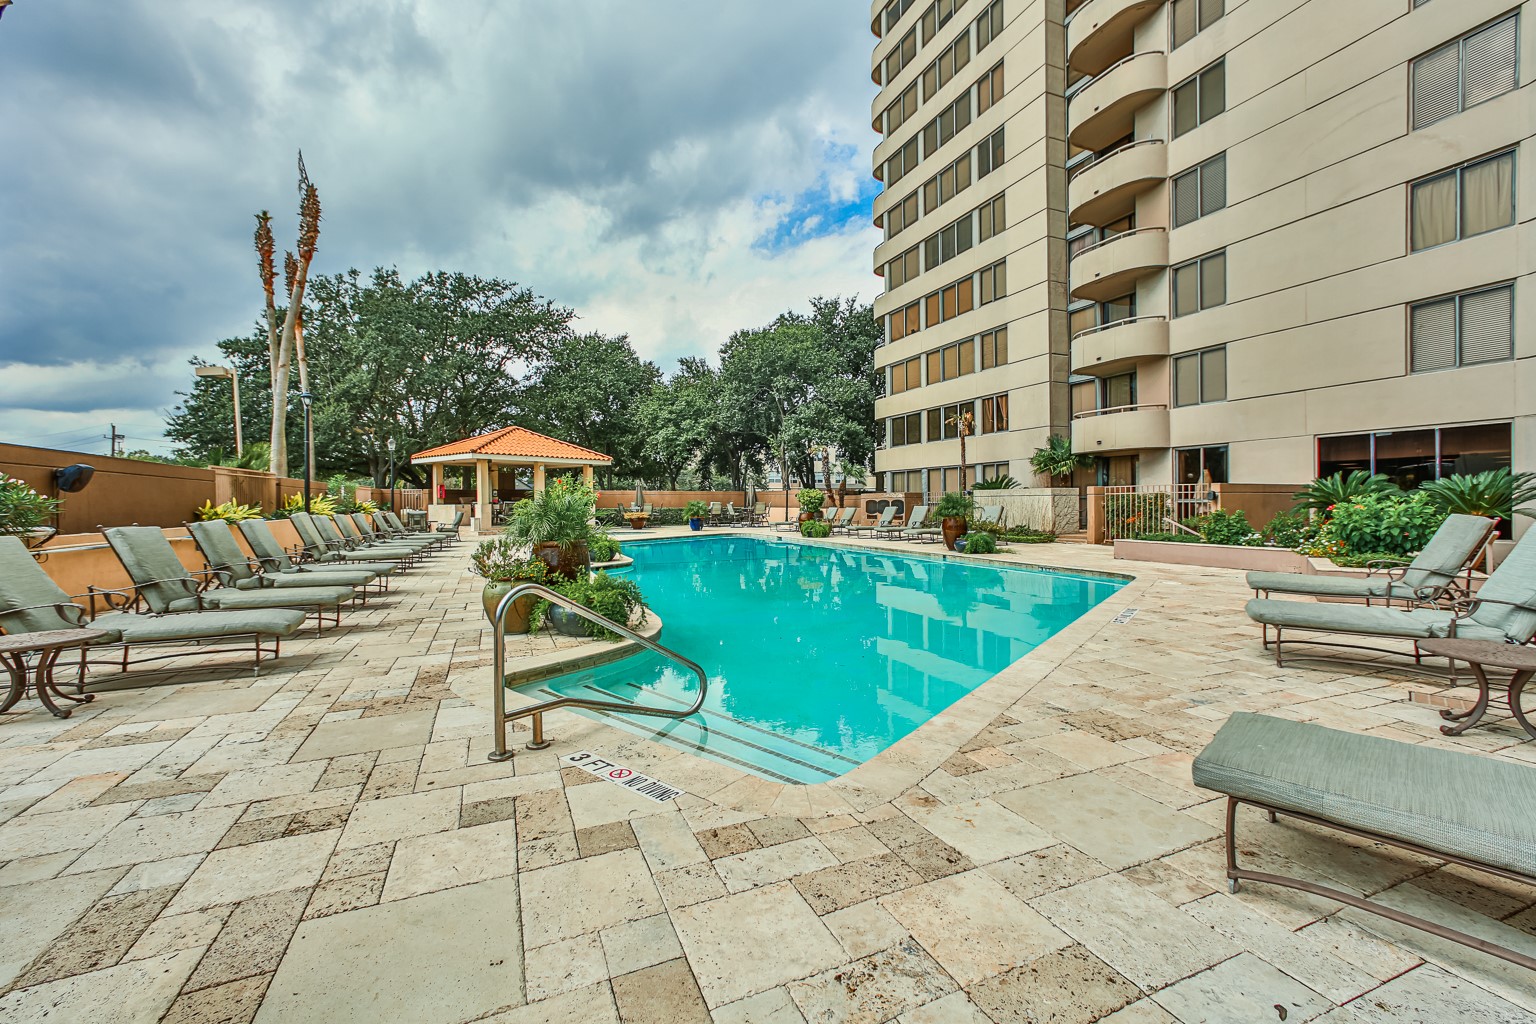 Living at Sage Condominiums offers a luxurious lifestyle with amenities such as a business center, concierge, fitness center, game room, library, outdoor lounge, party room, picnic area, security gate, spa, swimming pool, and pet-friendly environment.